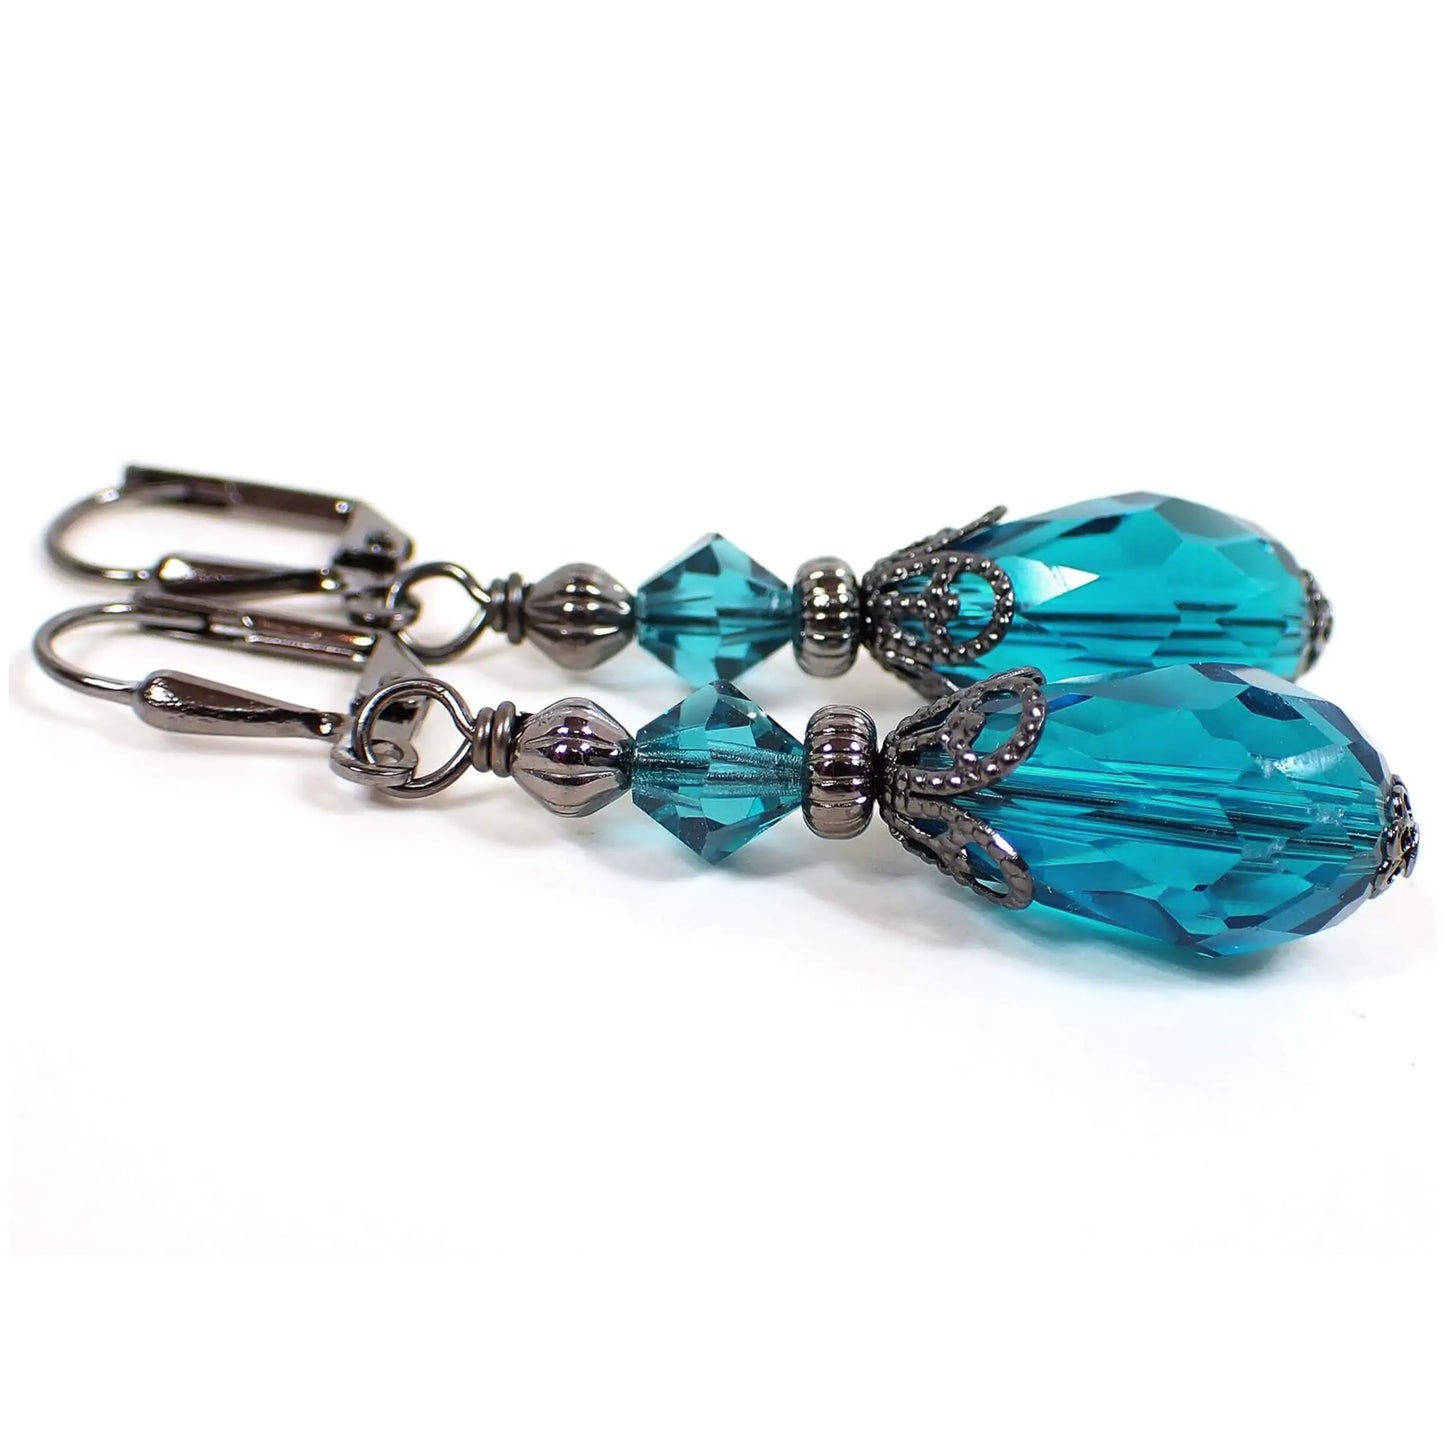 Side view of the handmade teardrop earrings. The metal is gunmetal dark gray in color. There are faceted glass crystal rondelle beads at the top and faceted glass crystal teardrop beads at the bottom. The beads are teal blue in color.